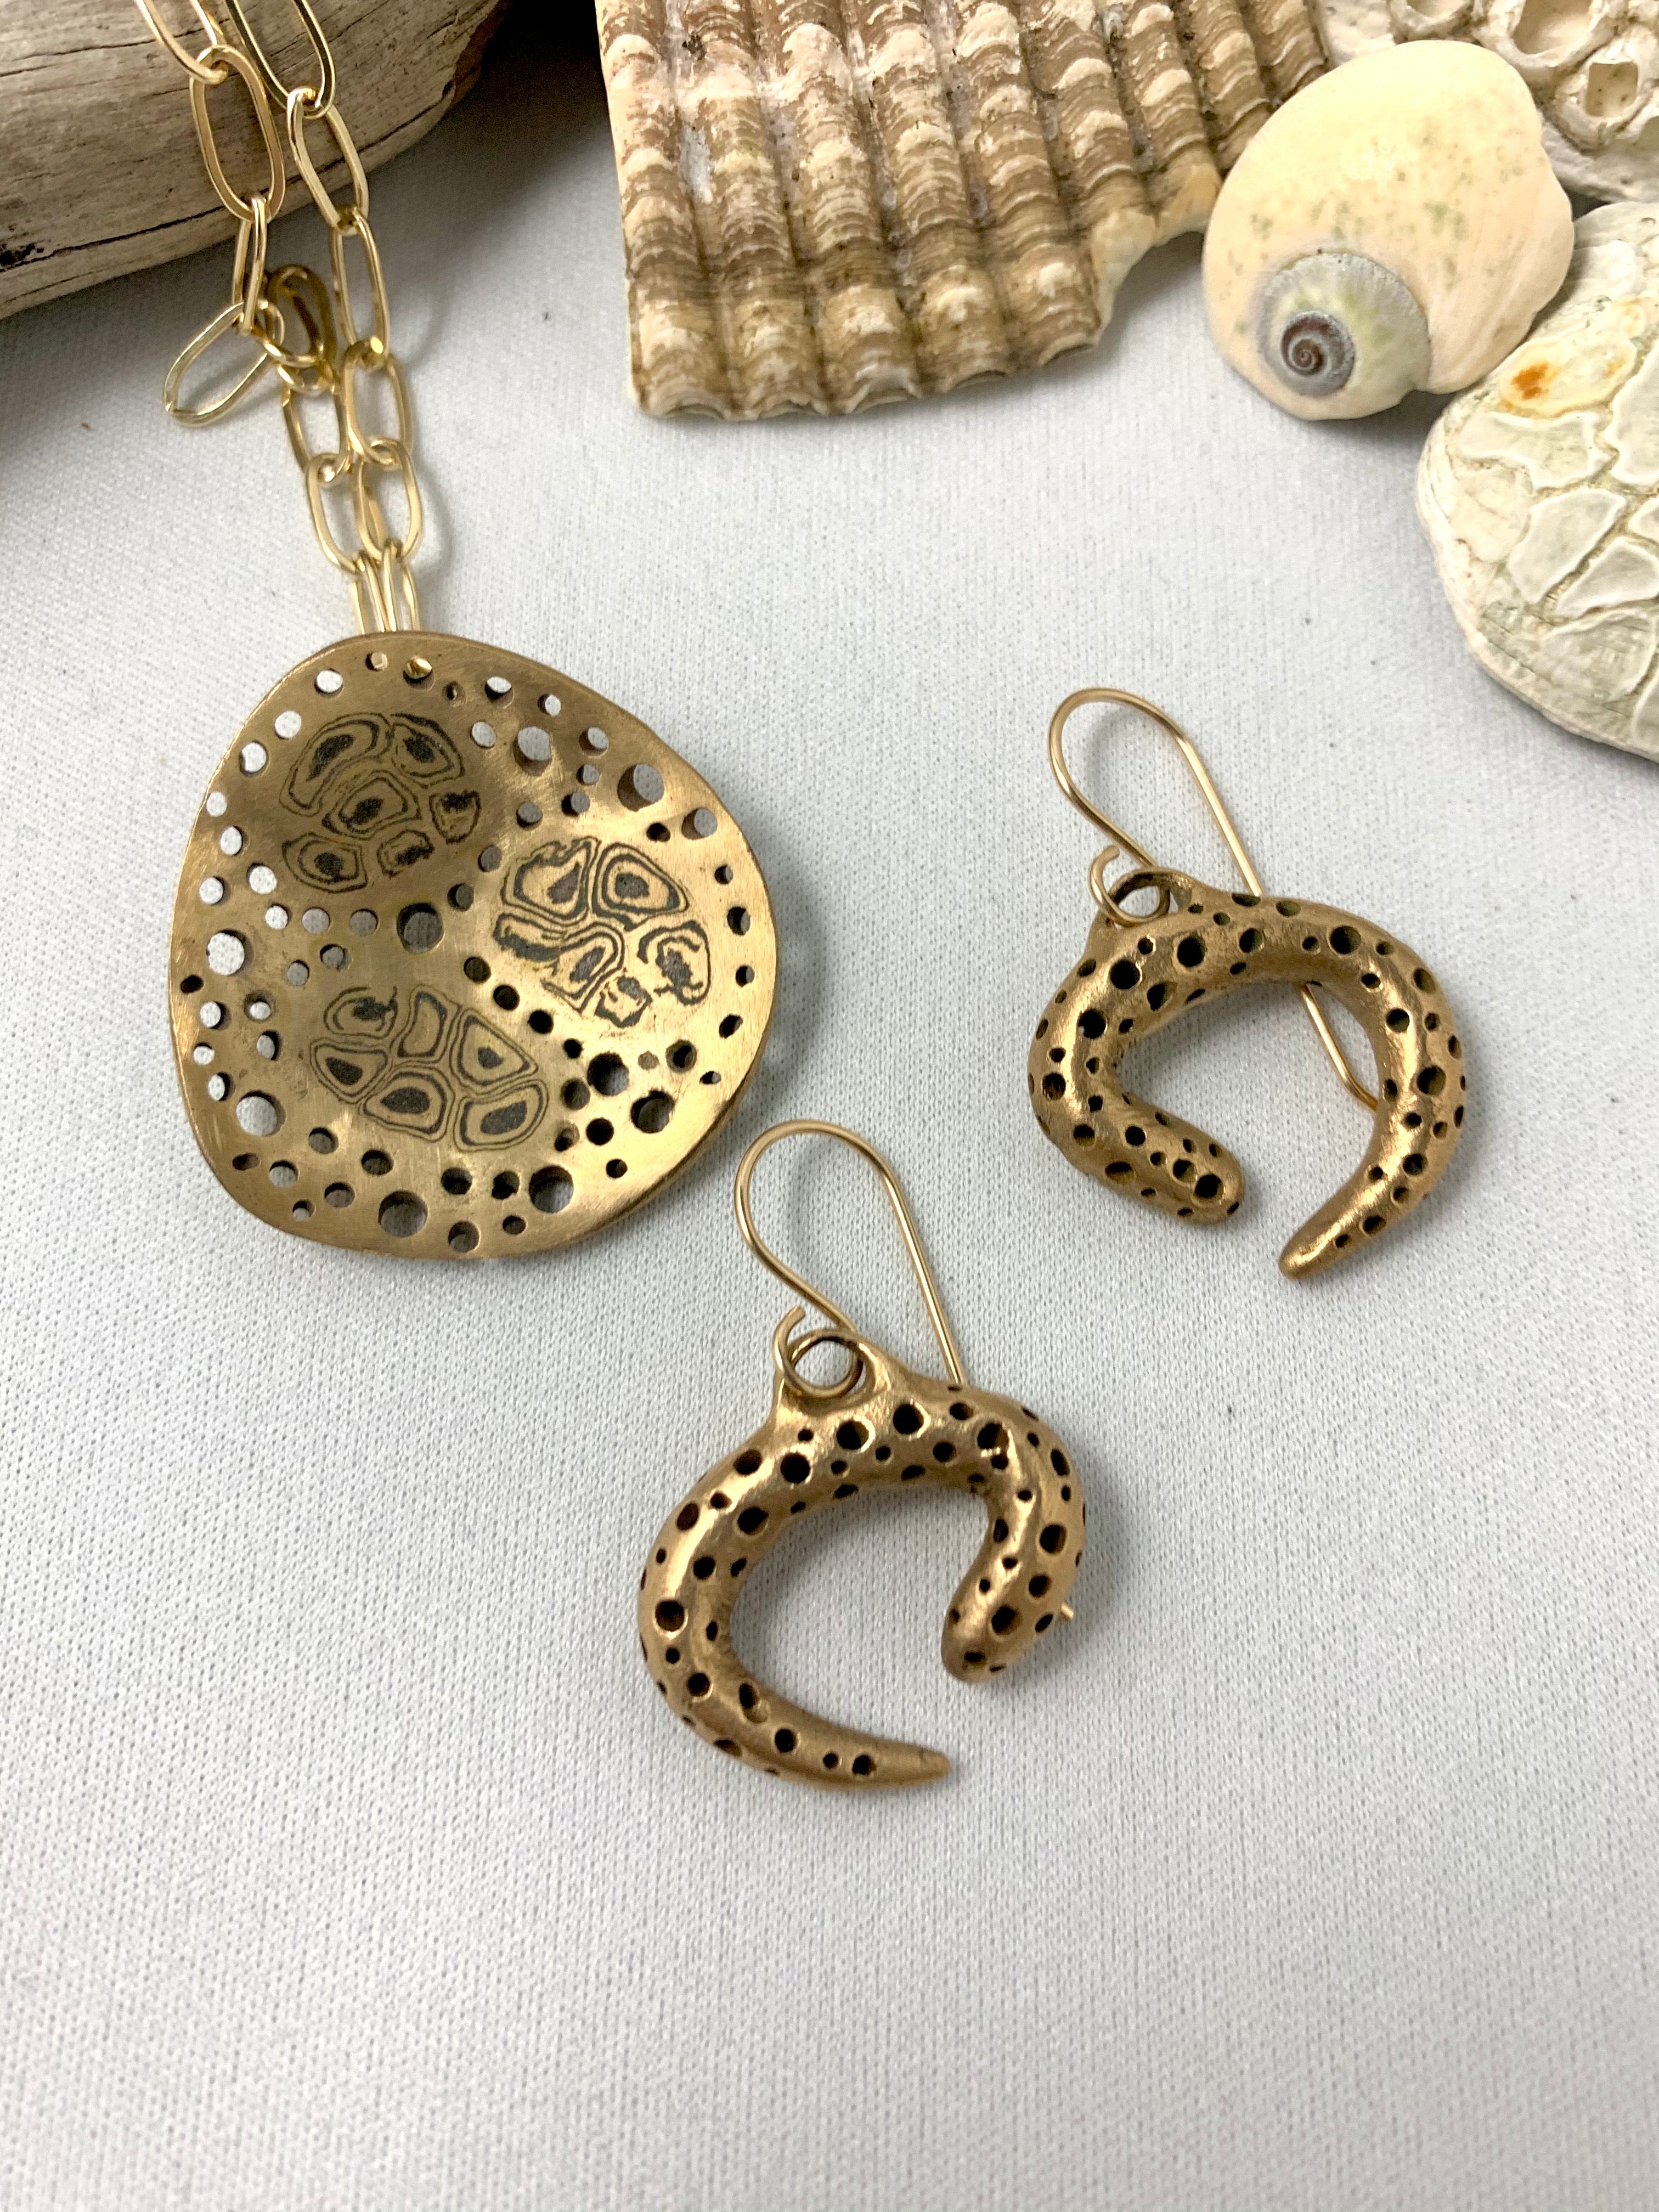 Bronze earrings paired with art jewelry necklace